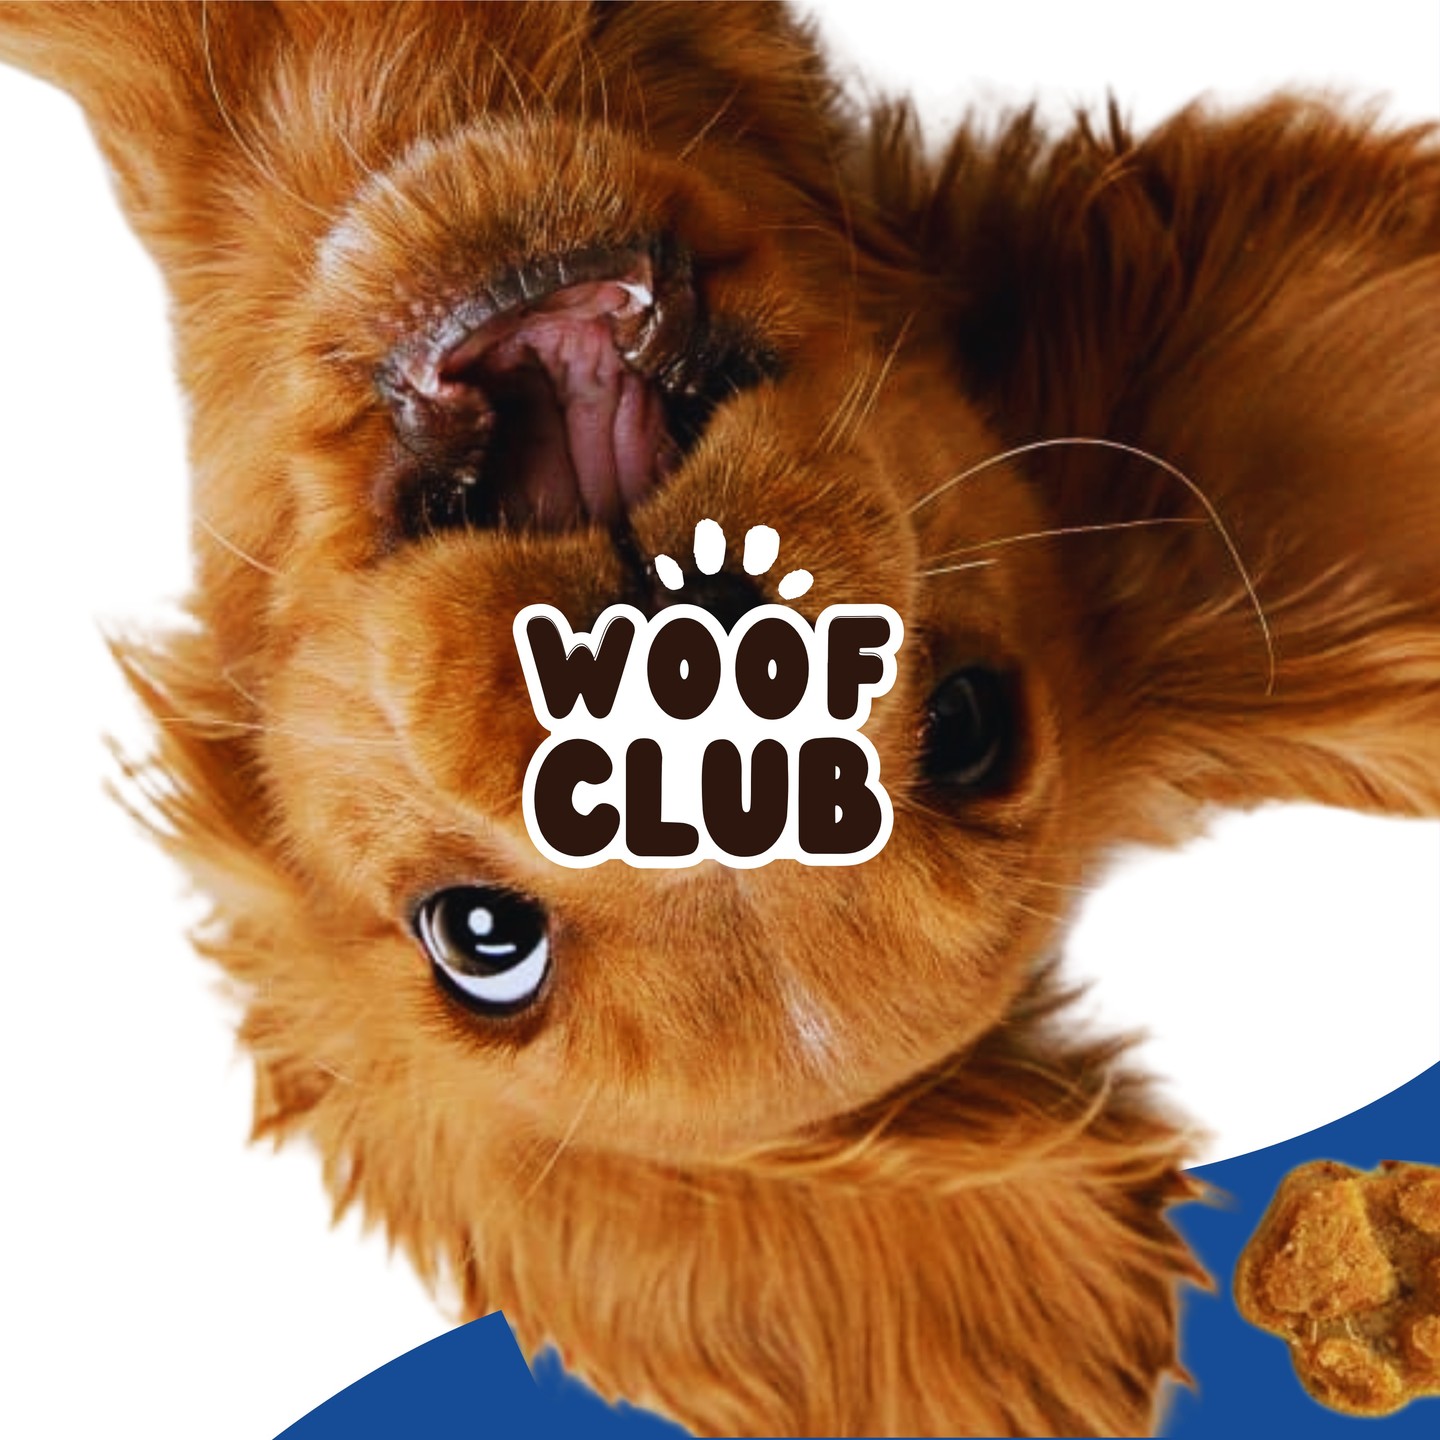 Woof Club is here! 🐶💙

Woof Club serves to produce 100% natural dog food and dog treats for all breeds, ensuring your fu